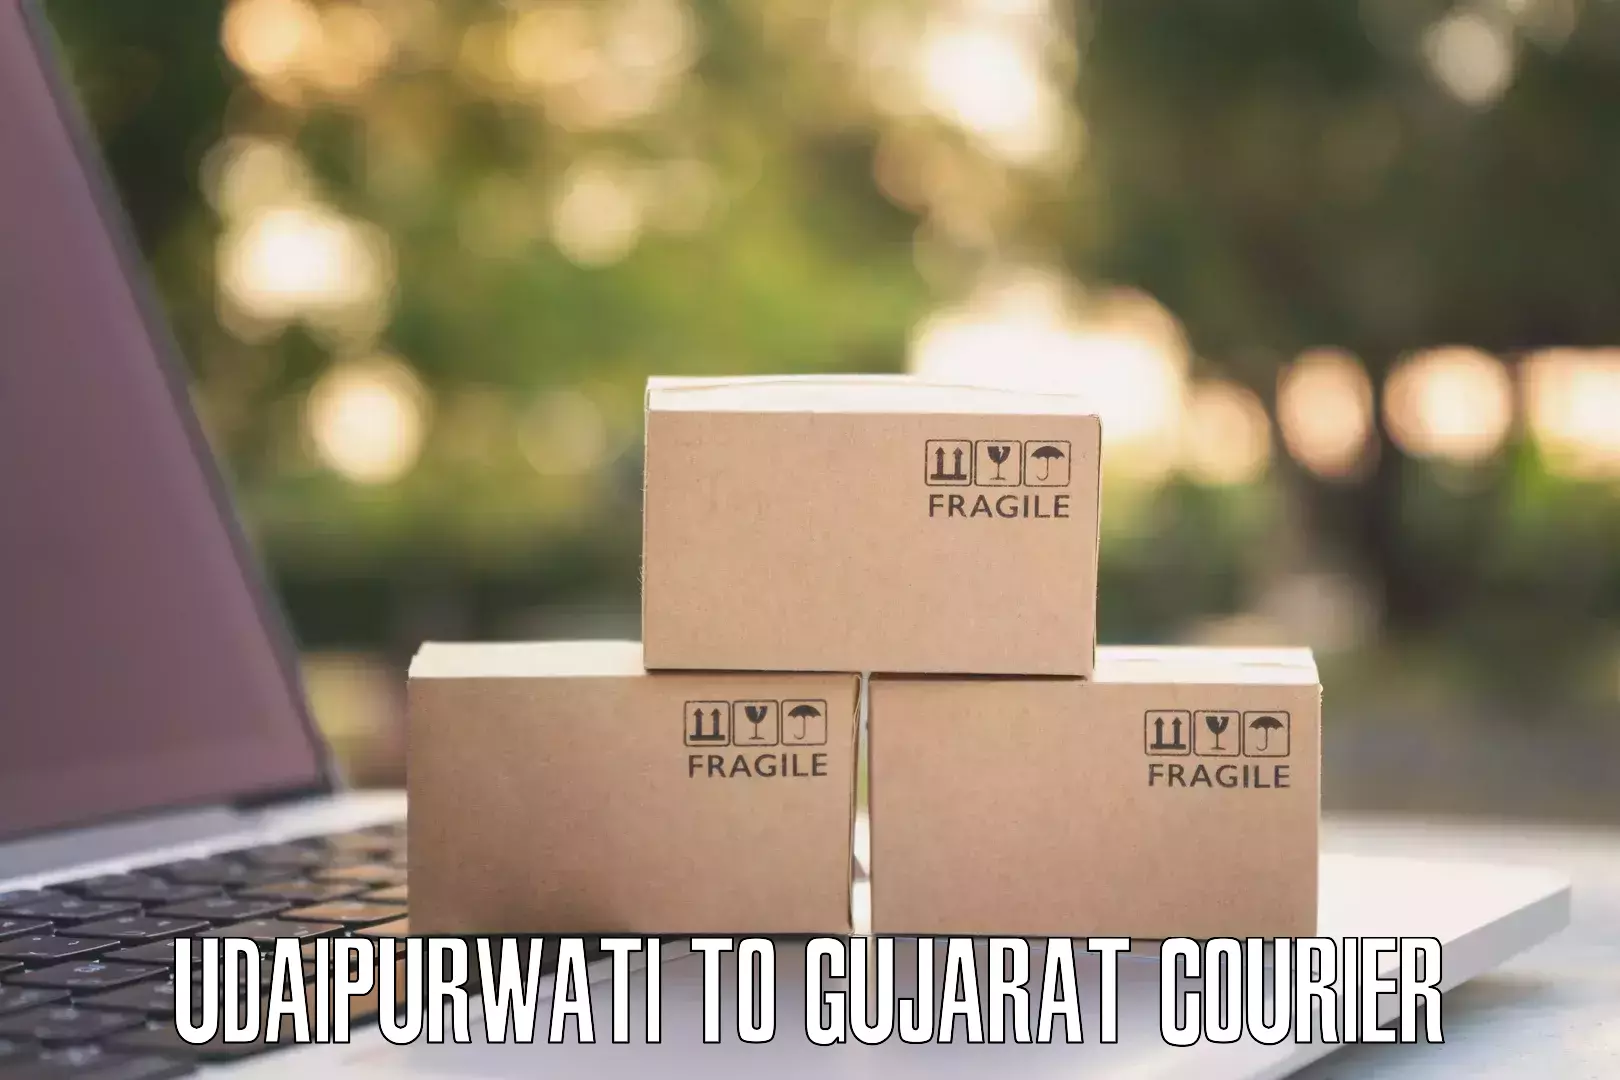 Next-day delivery options in Udaipurwati to Kandla Port